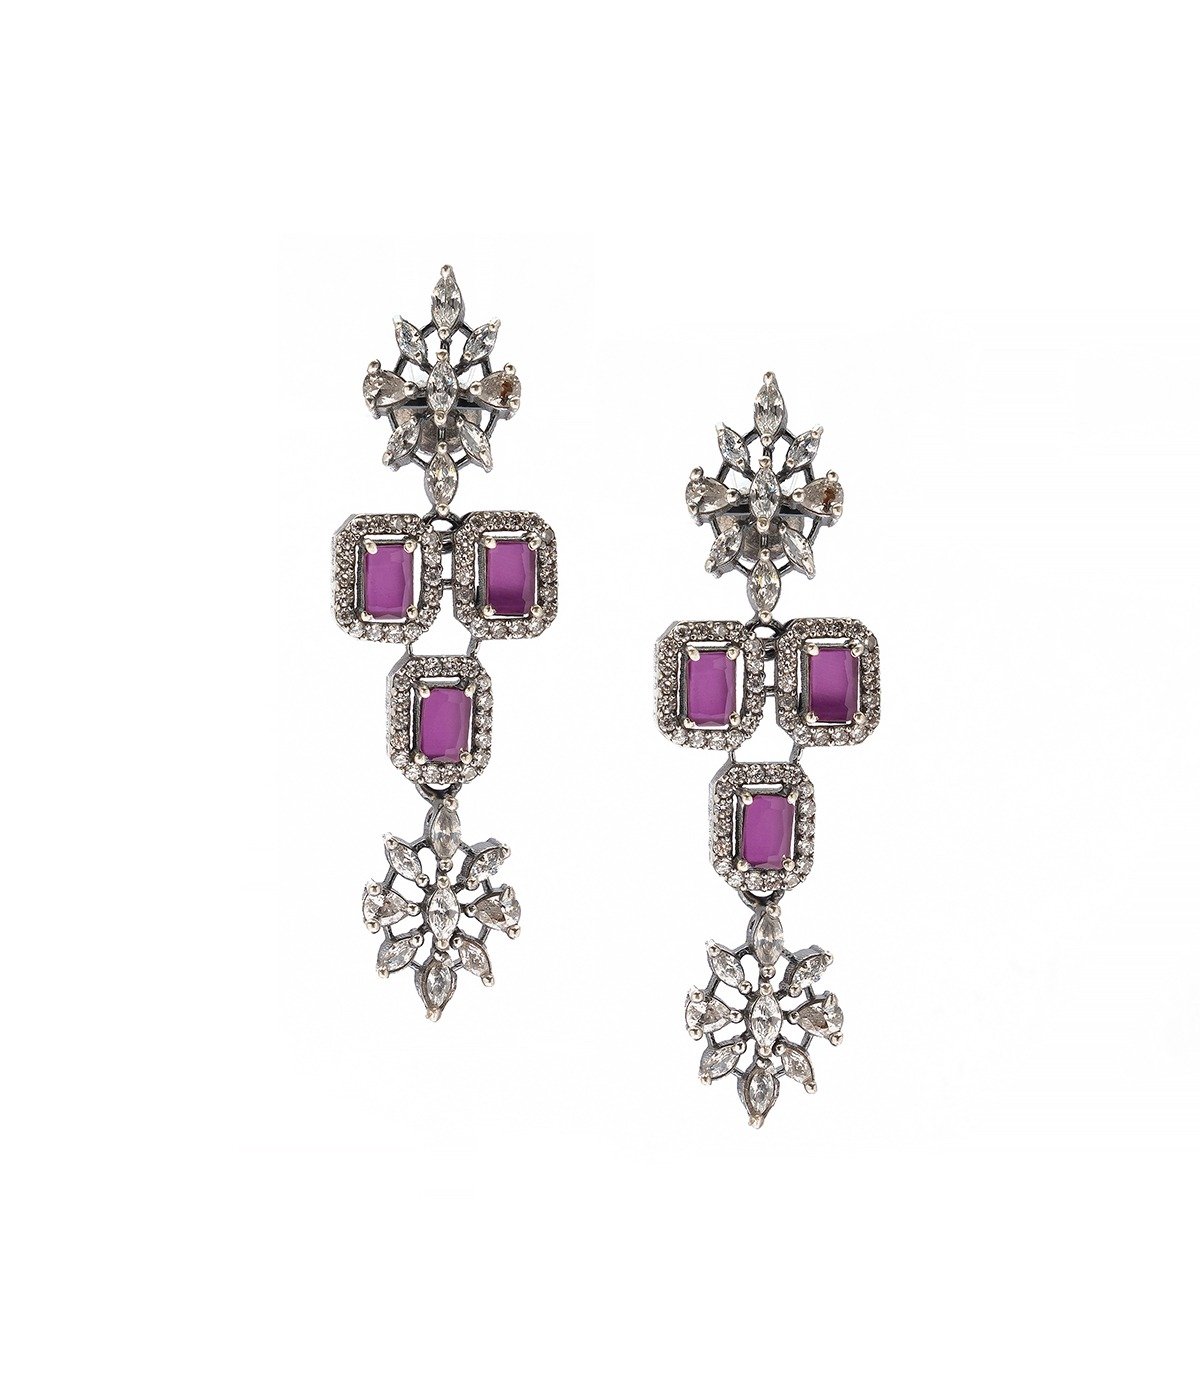 FLORAL PINK Sá¹¬ONE STUDDED FASHION EARRINGS FOR GIRLS